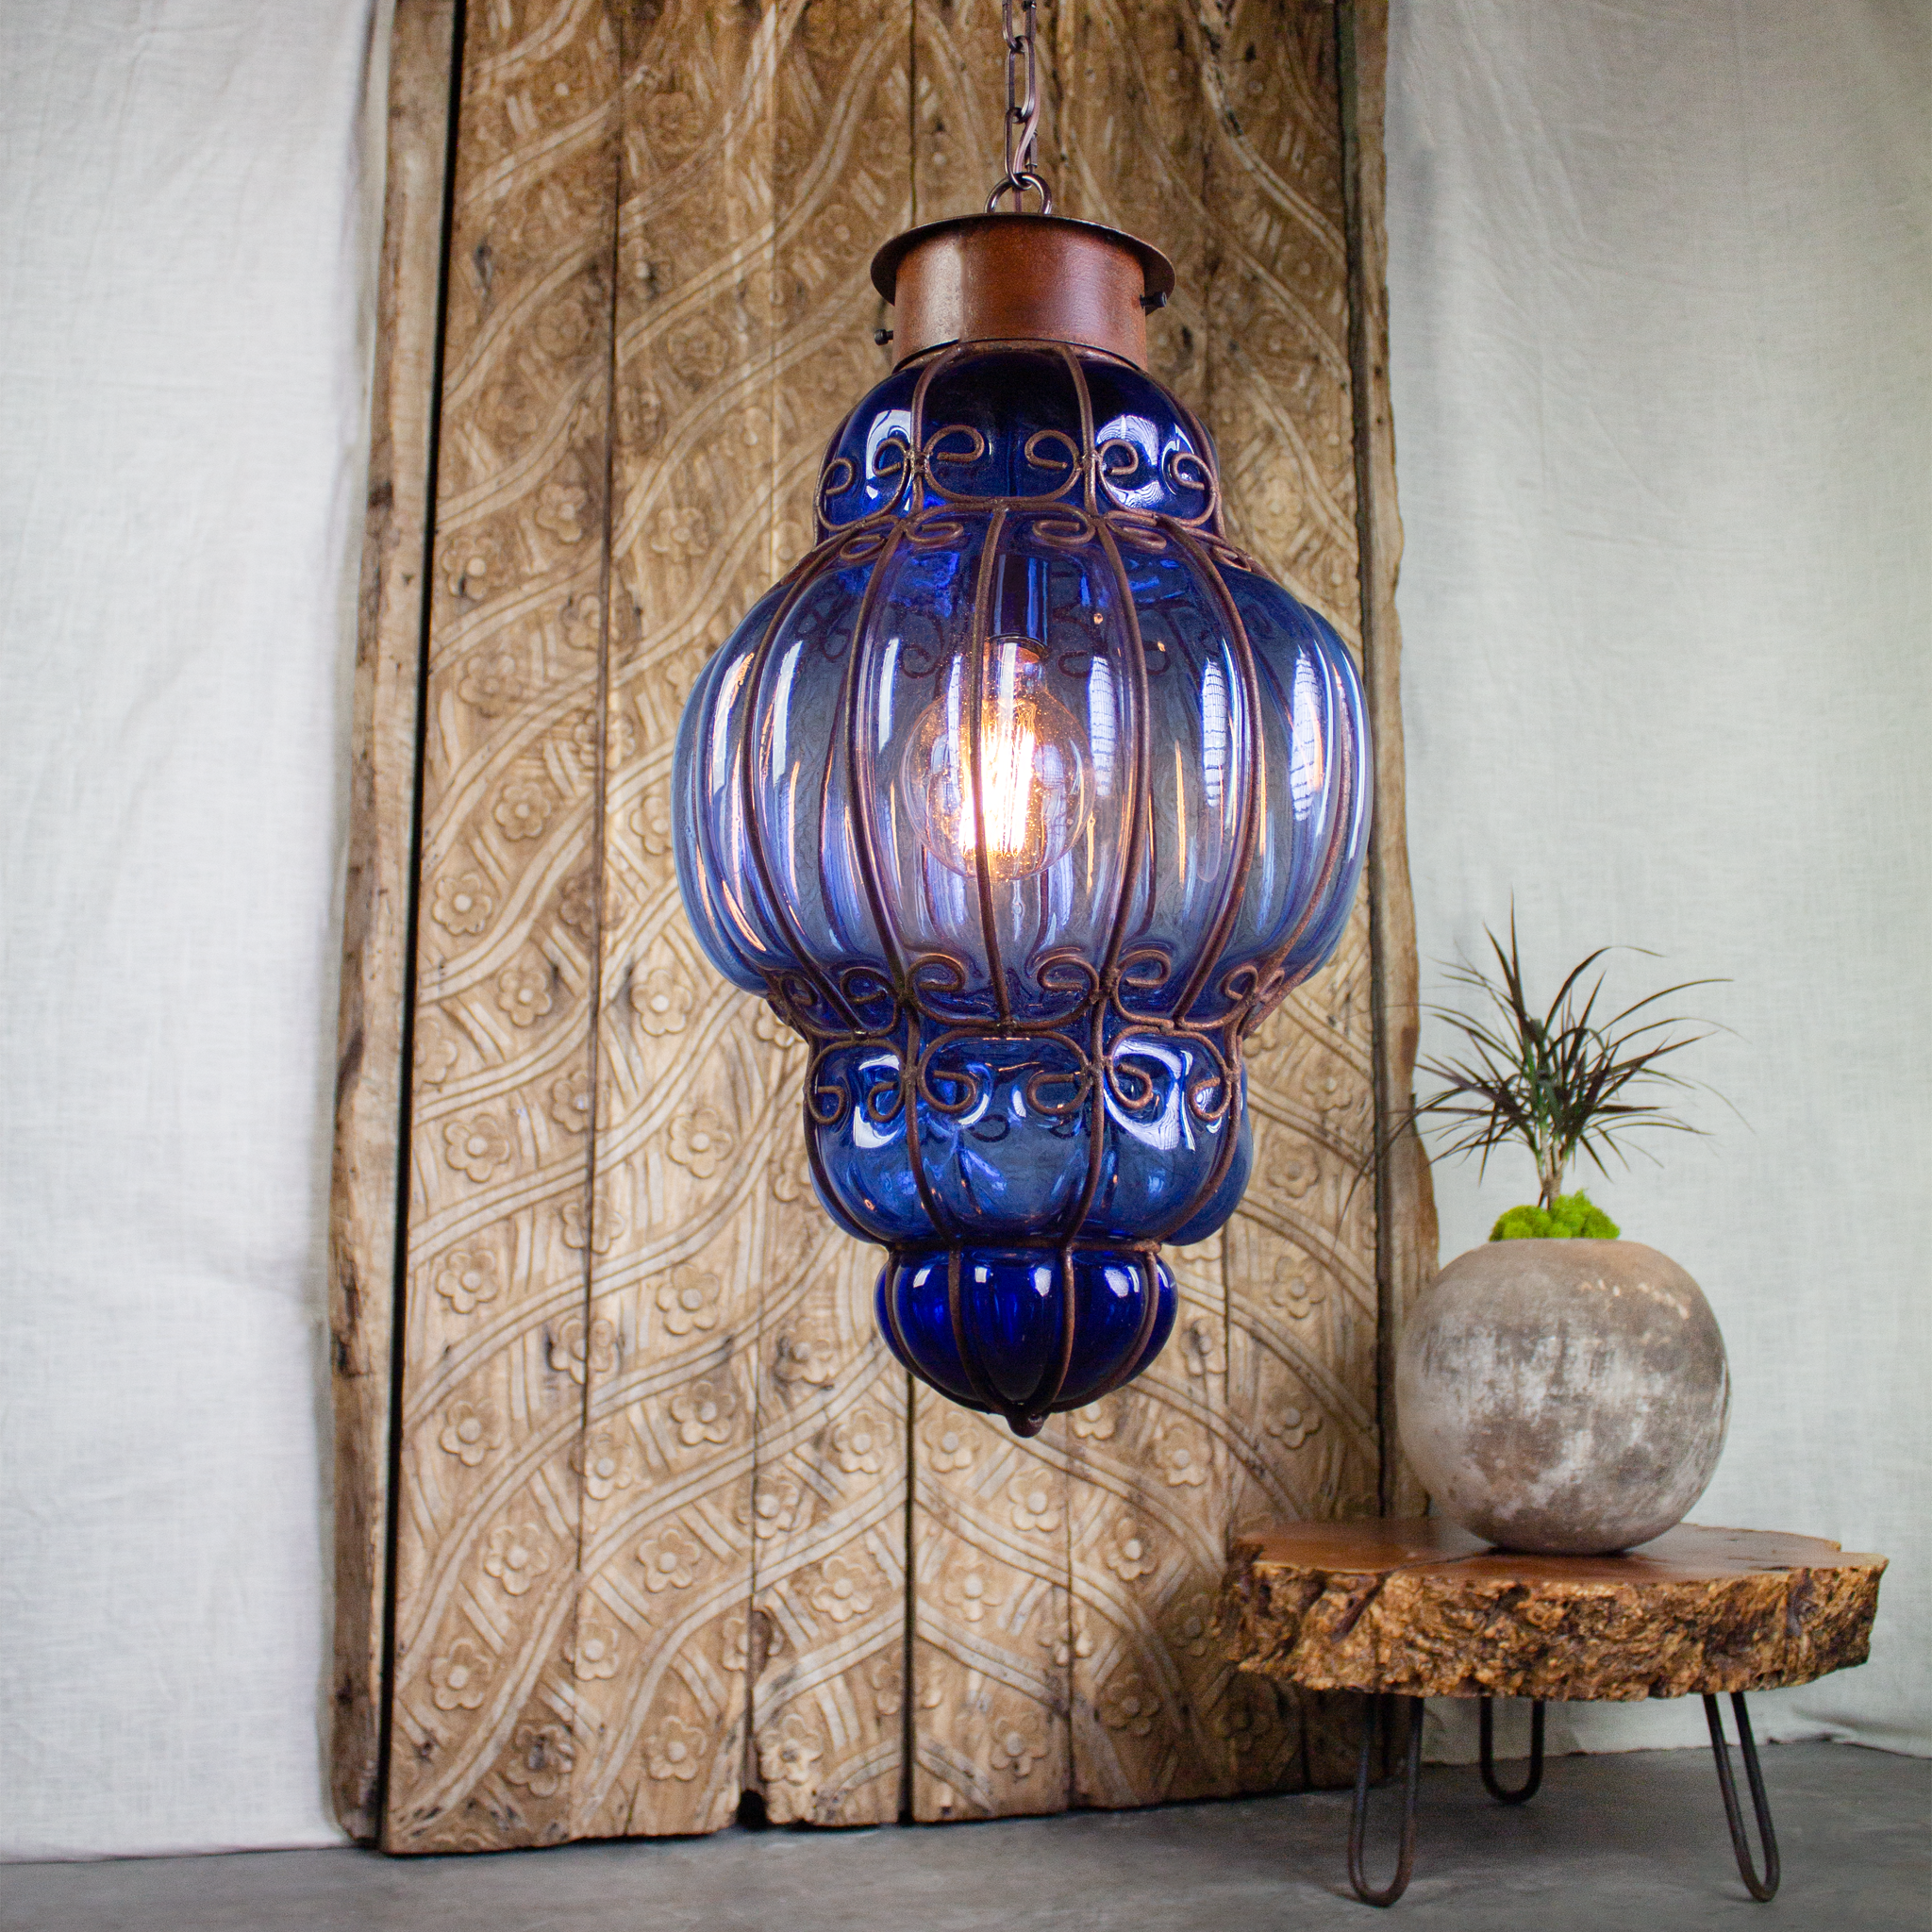 Pendant Lighting. Intriguing Illumination is in the Details.